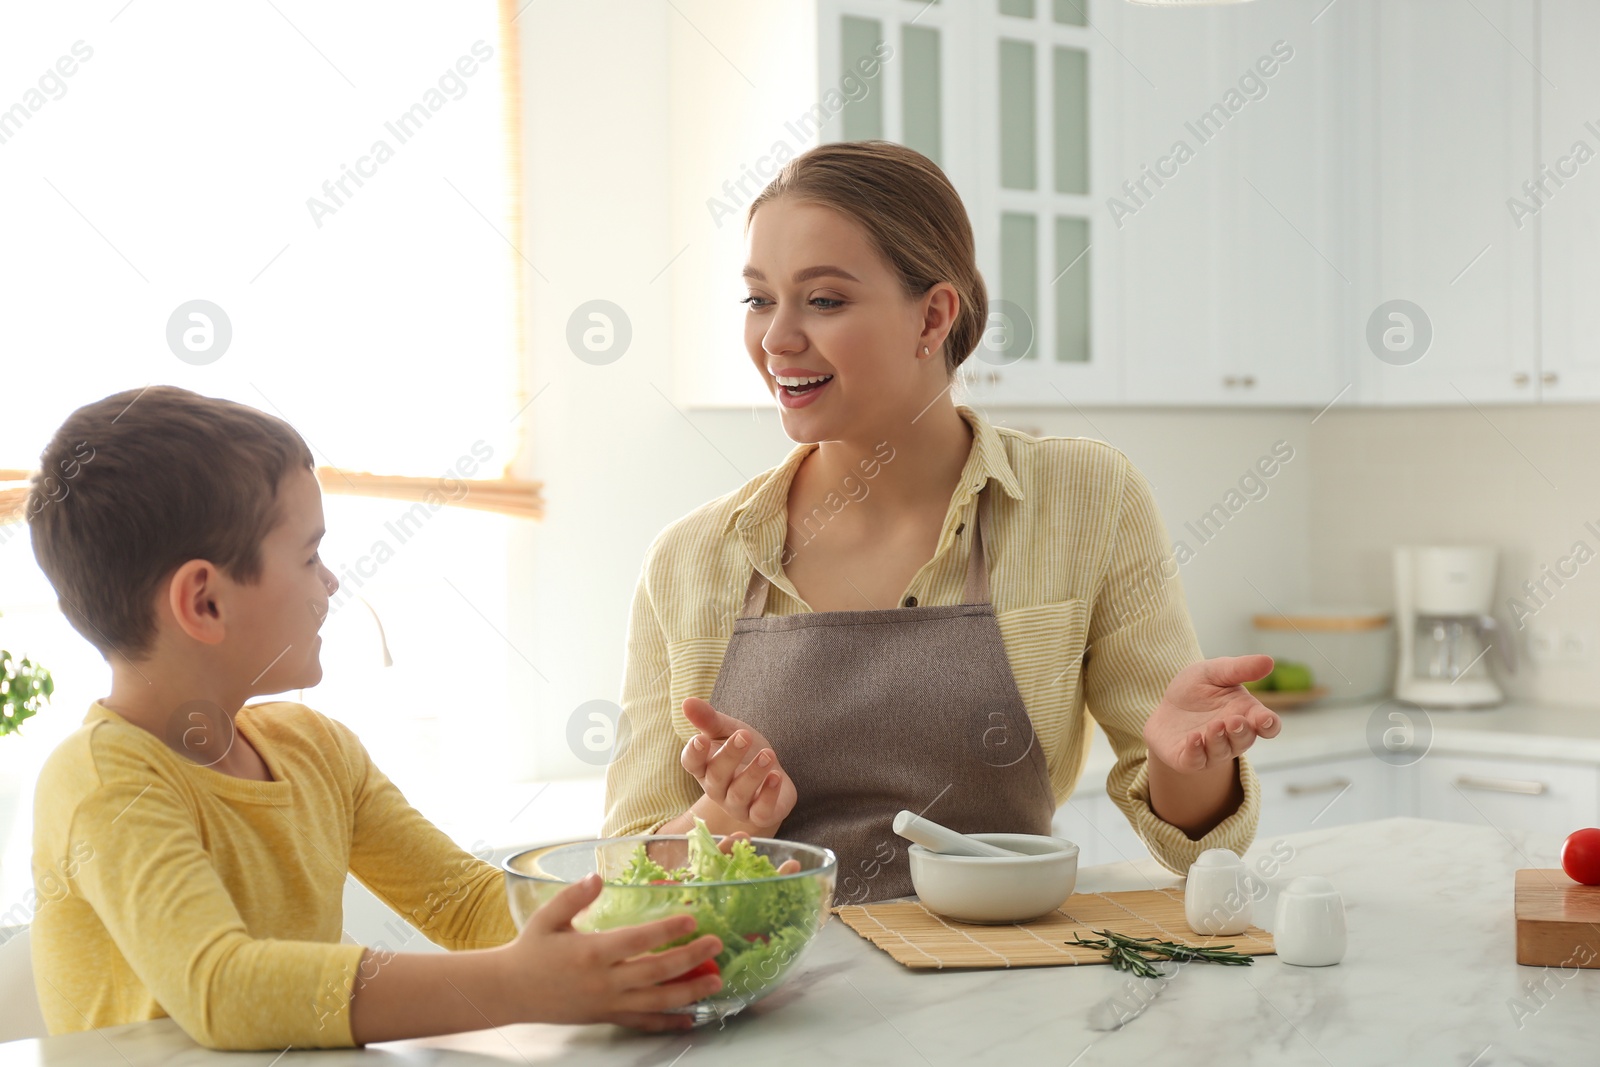 Photo of Mother and son cooking salad together in kitchen